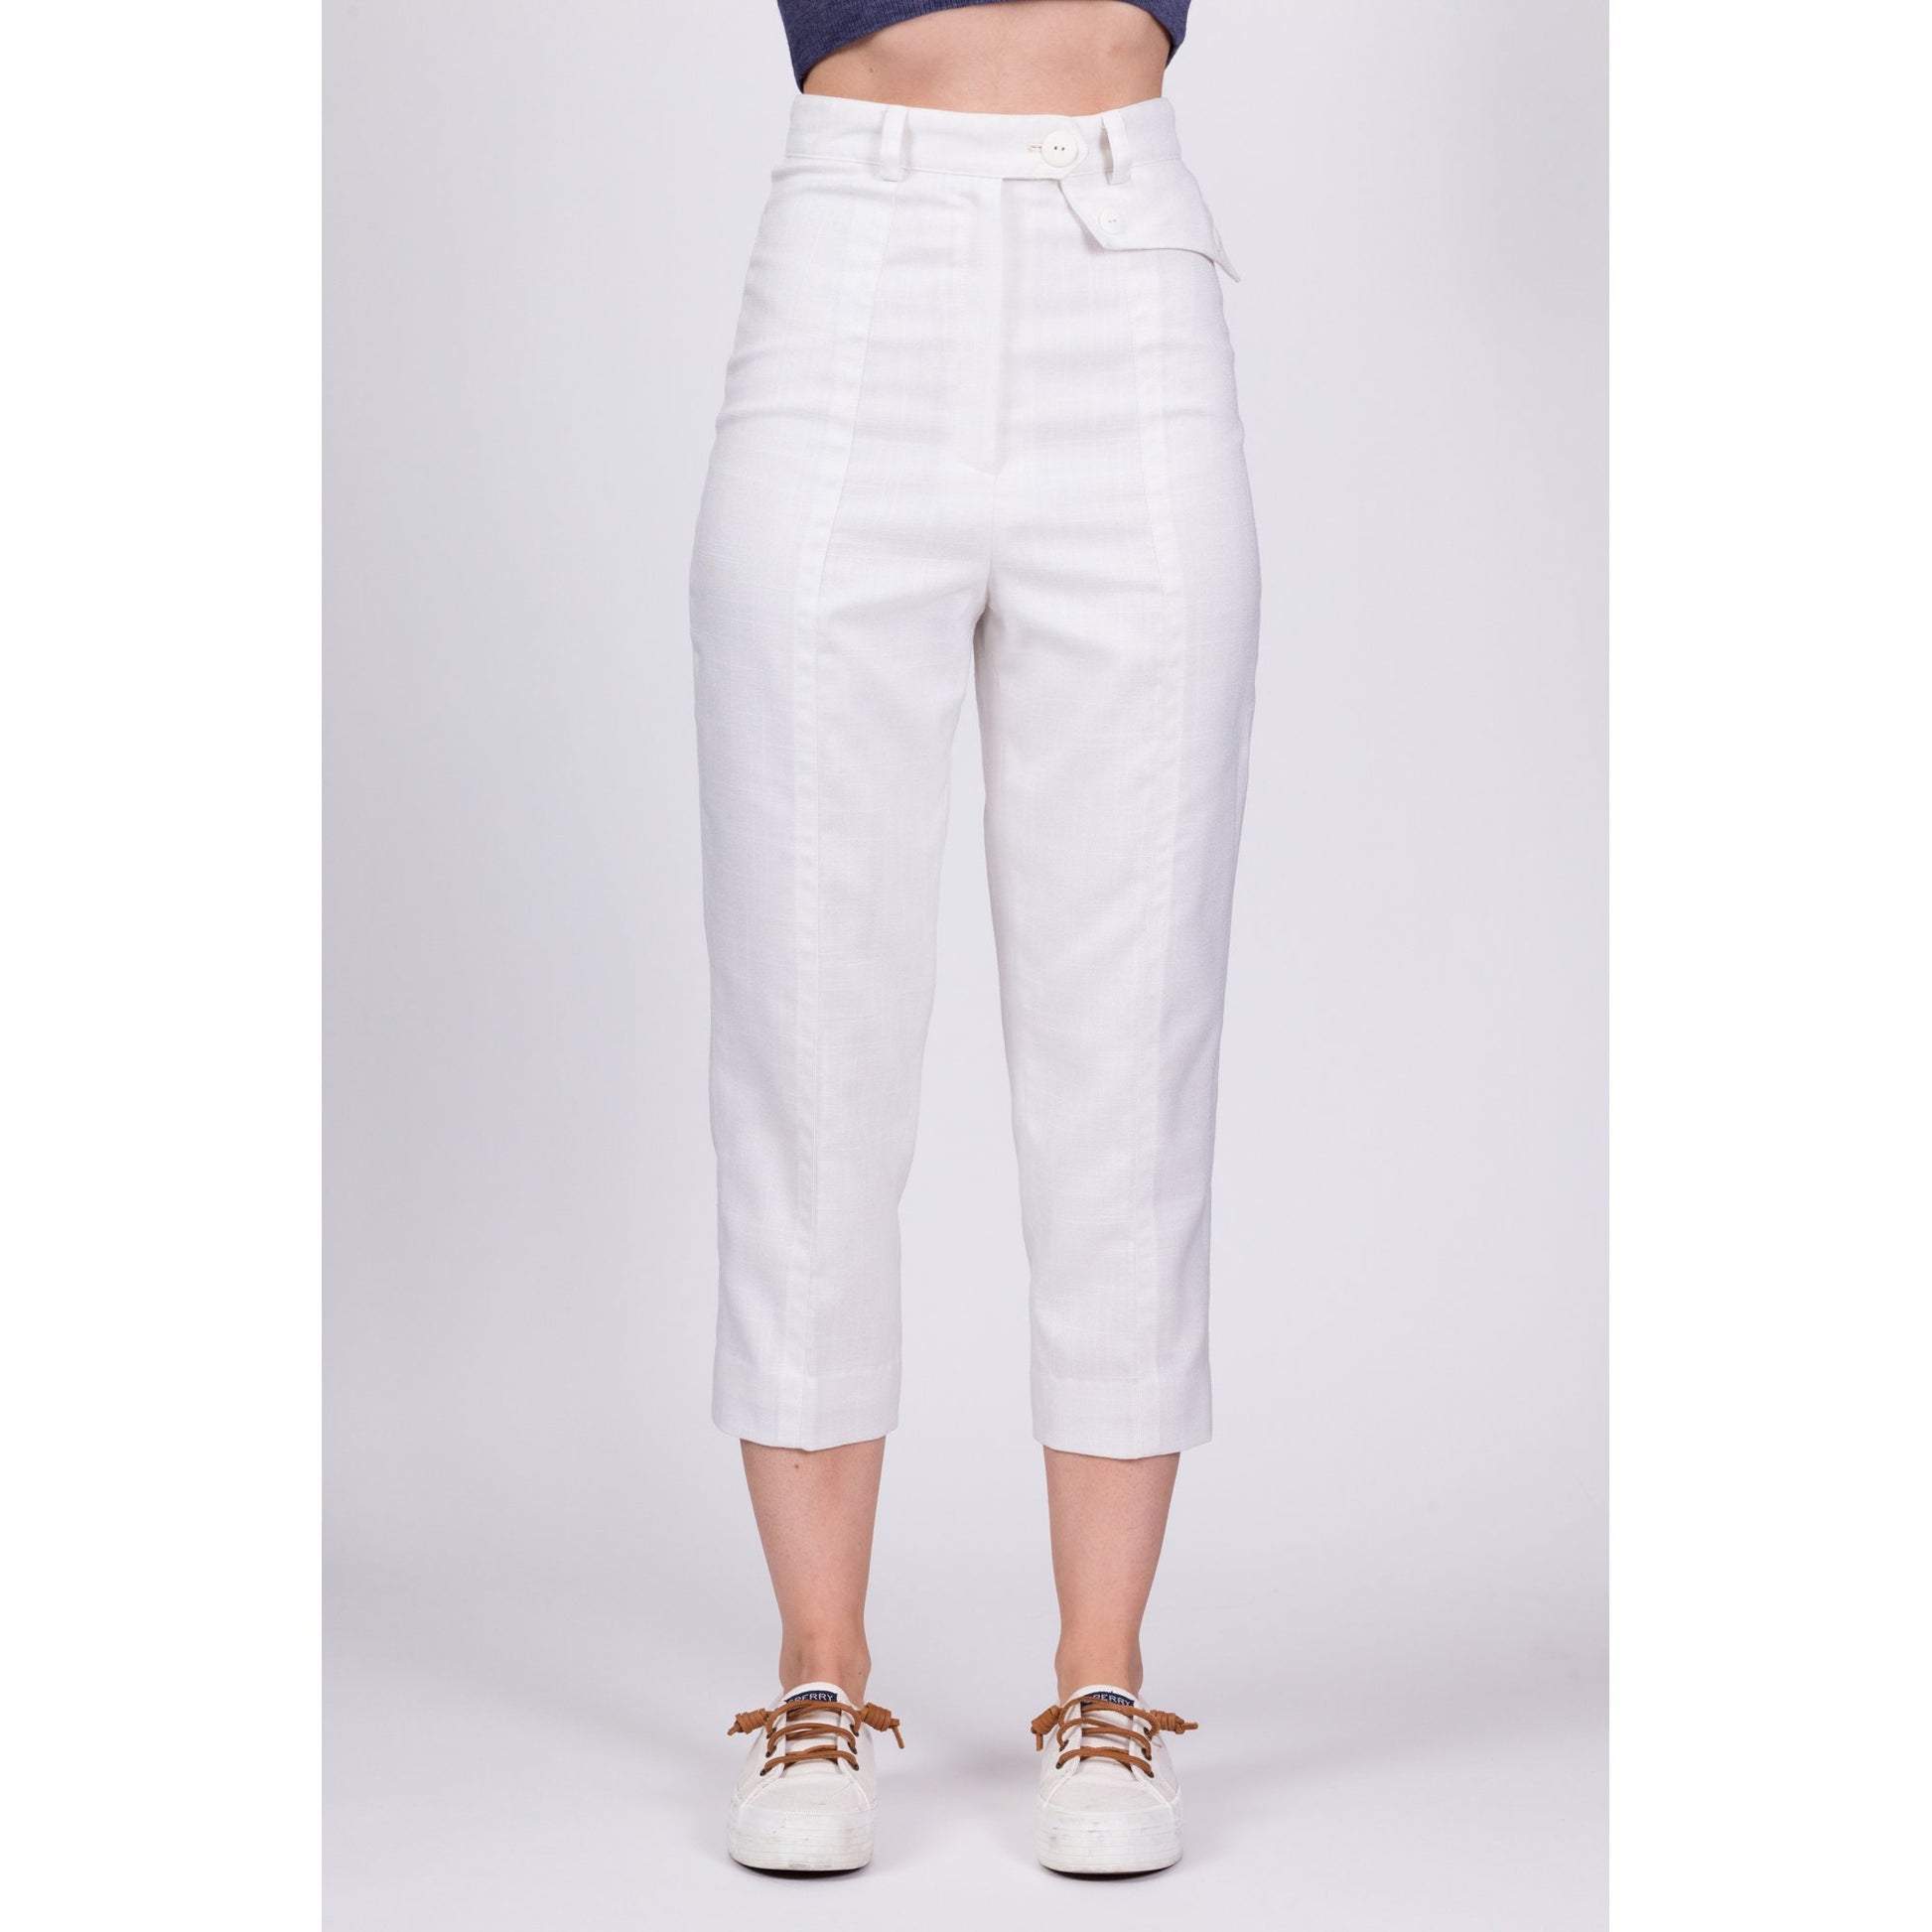 80s White High Waisted Capri Pants - Petite Extra Small, 23 – Flying Apple  Vintage